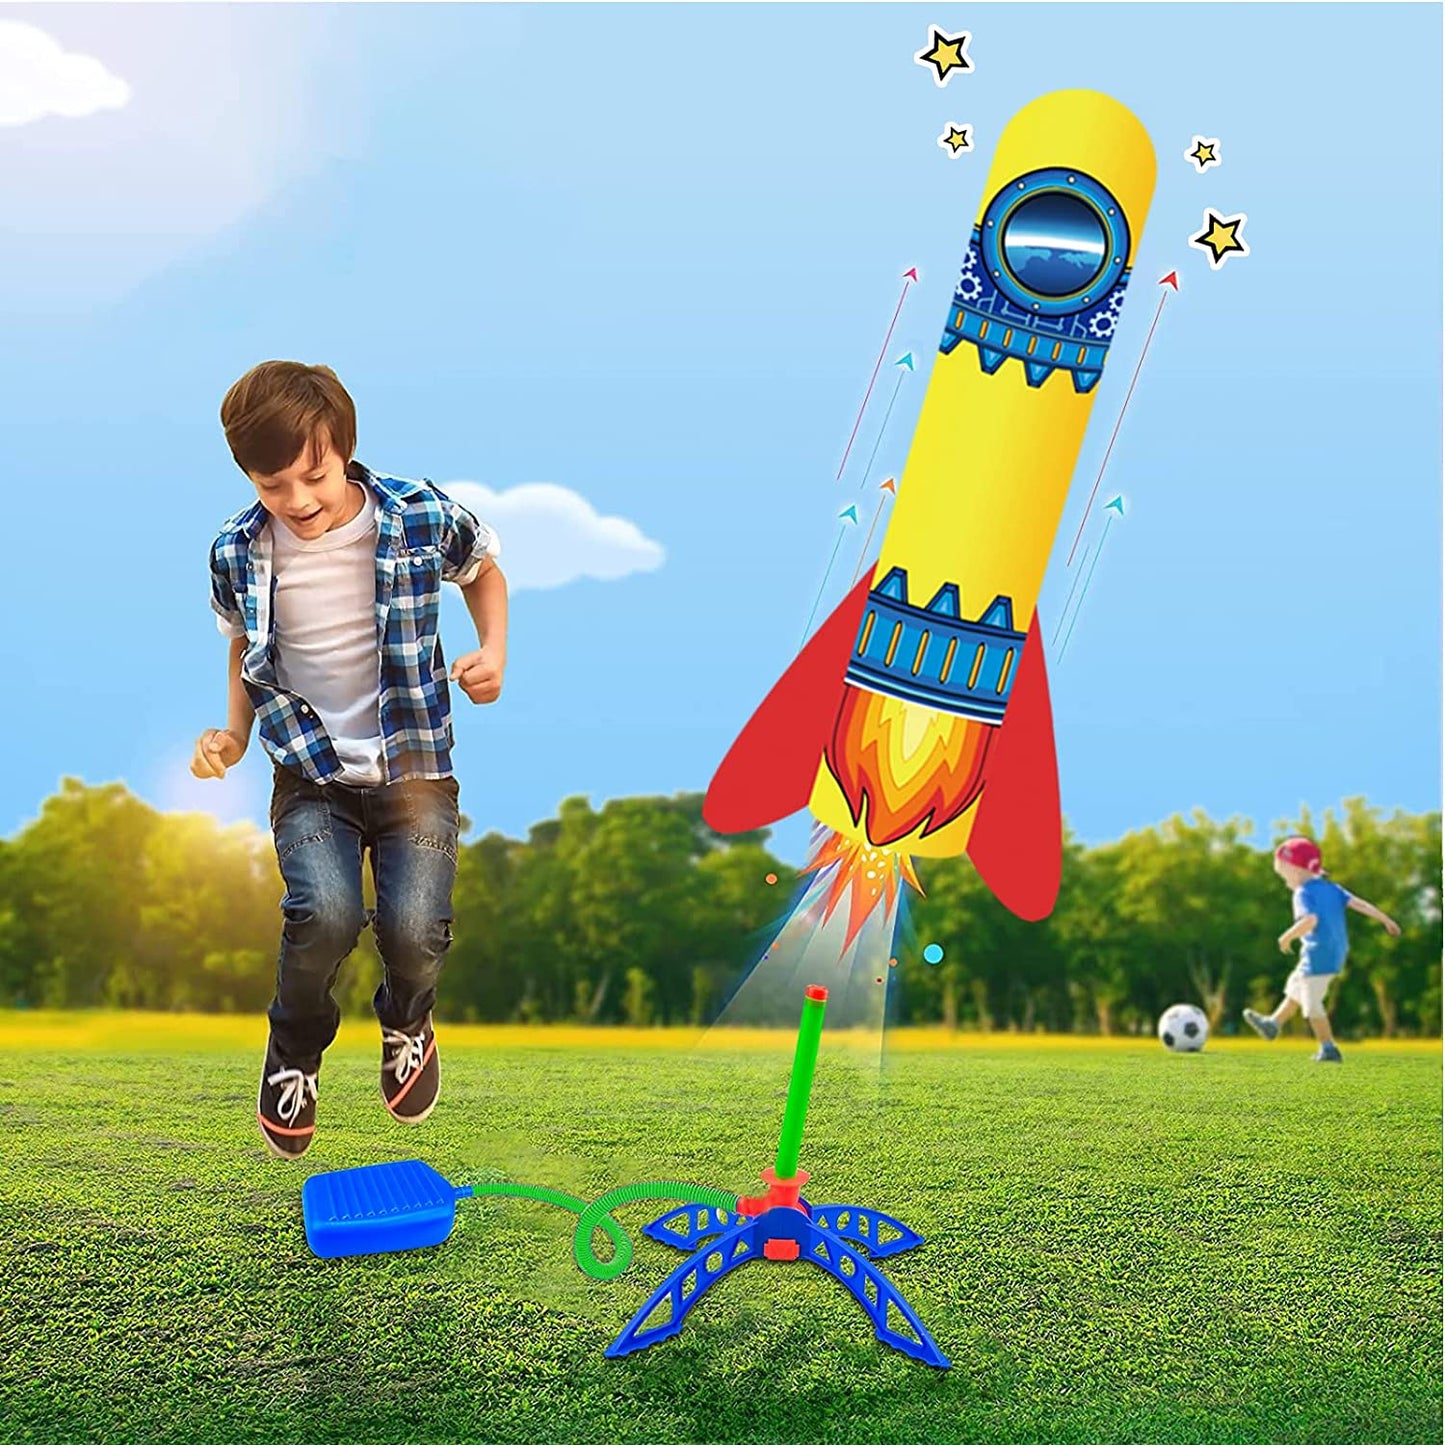 Rocket & Planes with Air Powered Launcher Toys for Kids Ages 3 4 5 6 7 8-12 Years Old Boys Girls Outdoor Jumping Step On Games Party Favors, Outside Games STEAM Toys Birthday Xmas Gifts